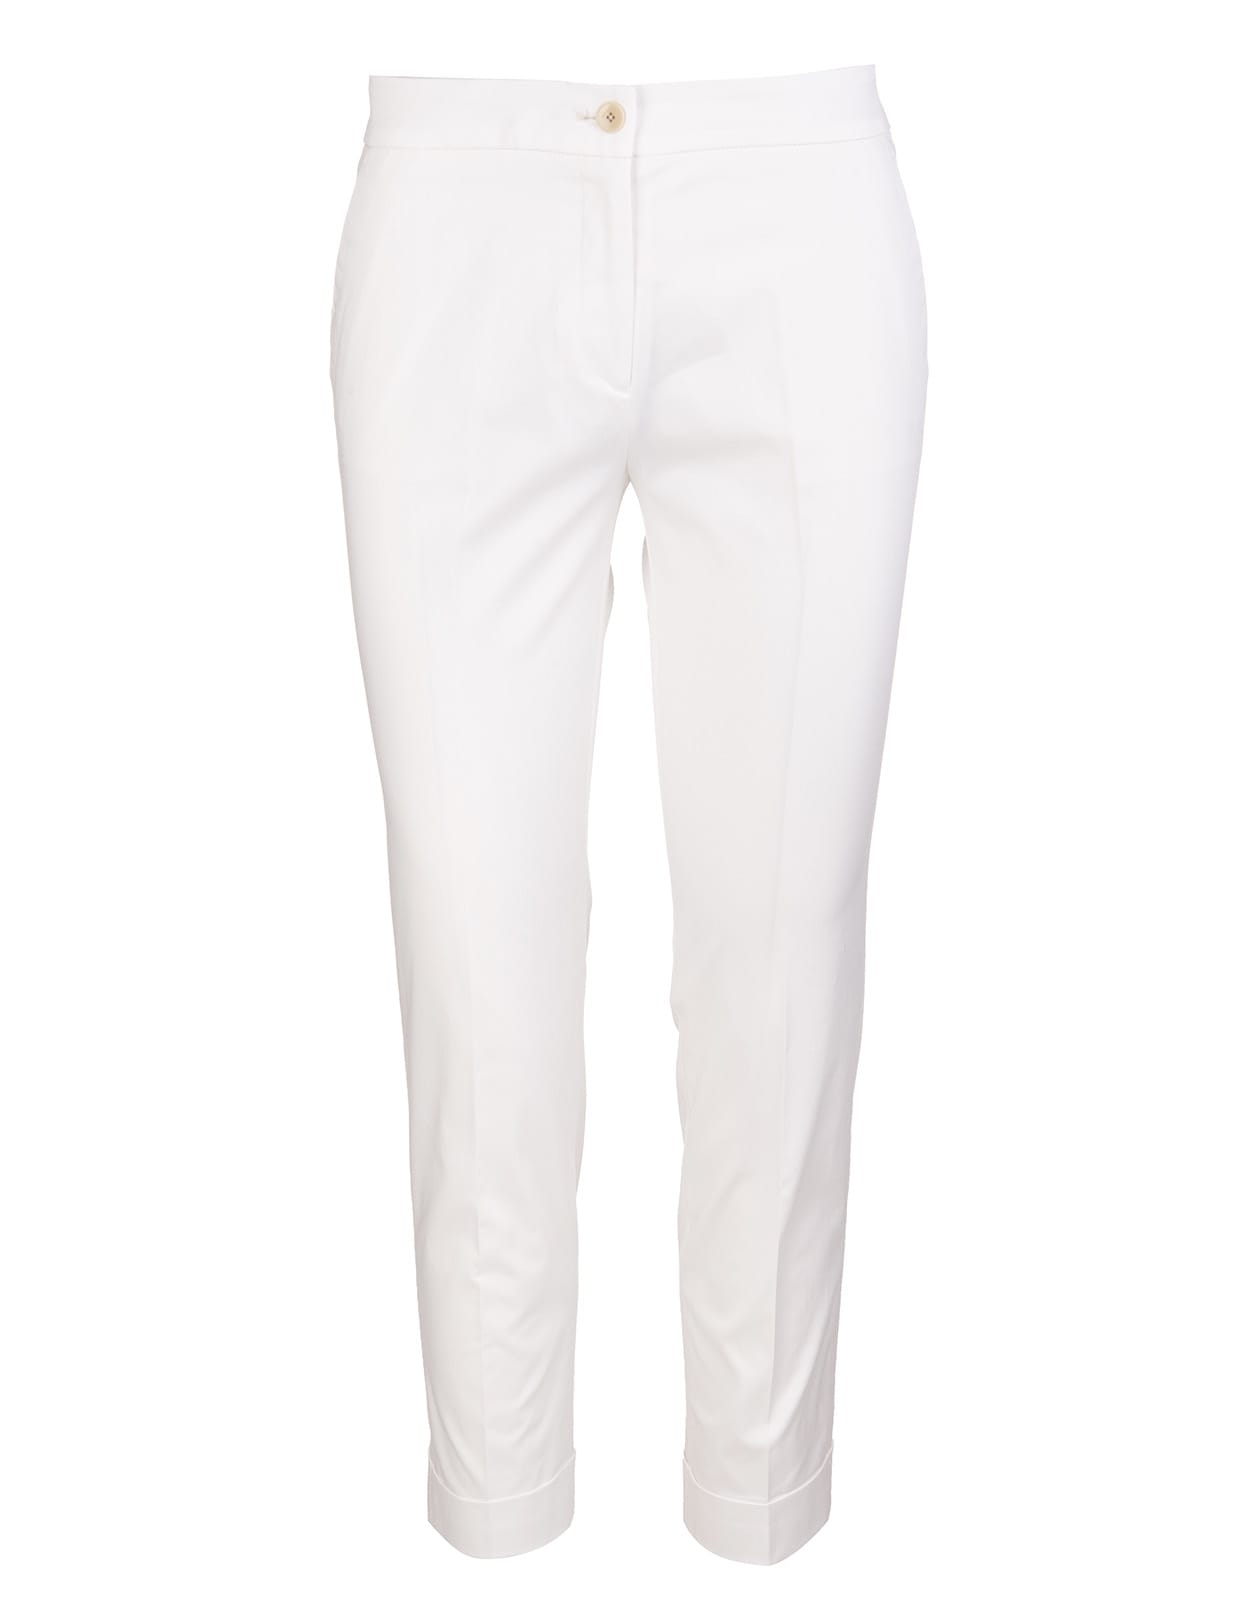 Etro Woman White Tailored Trousers